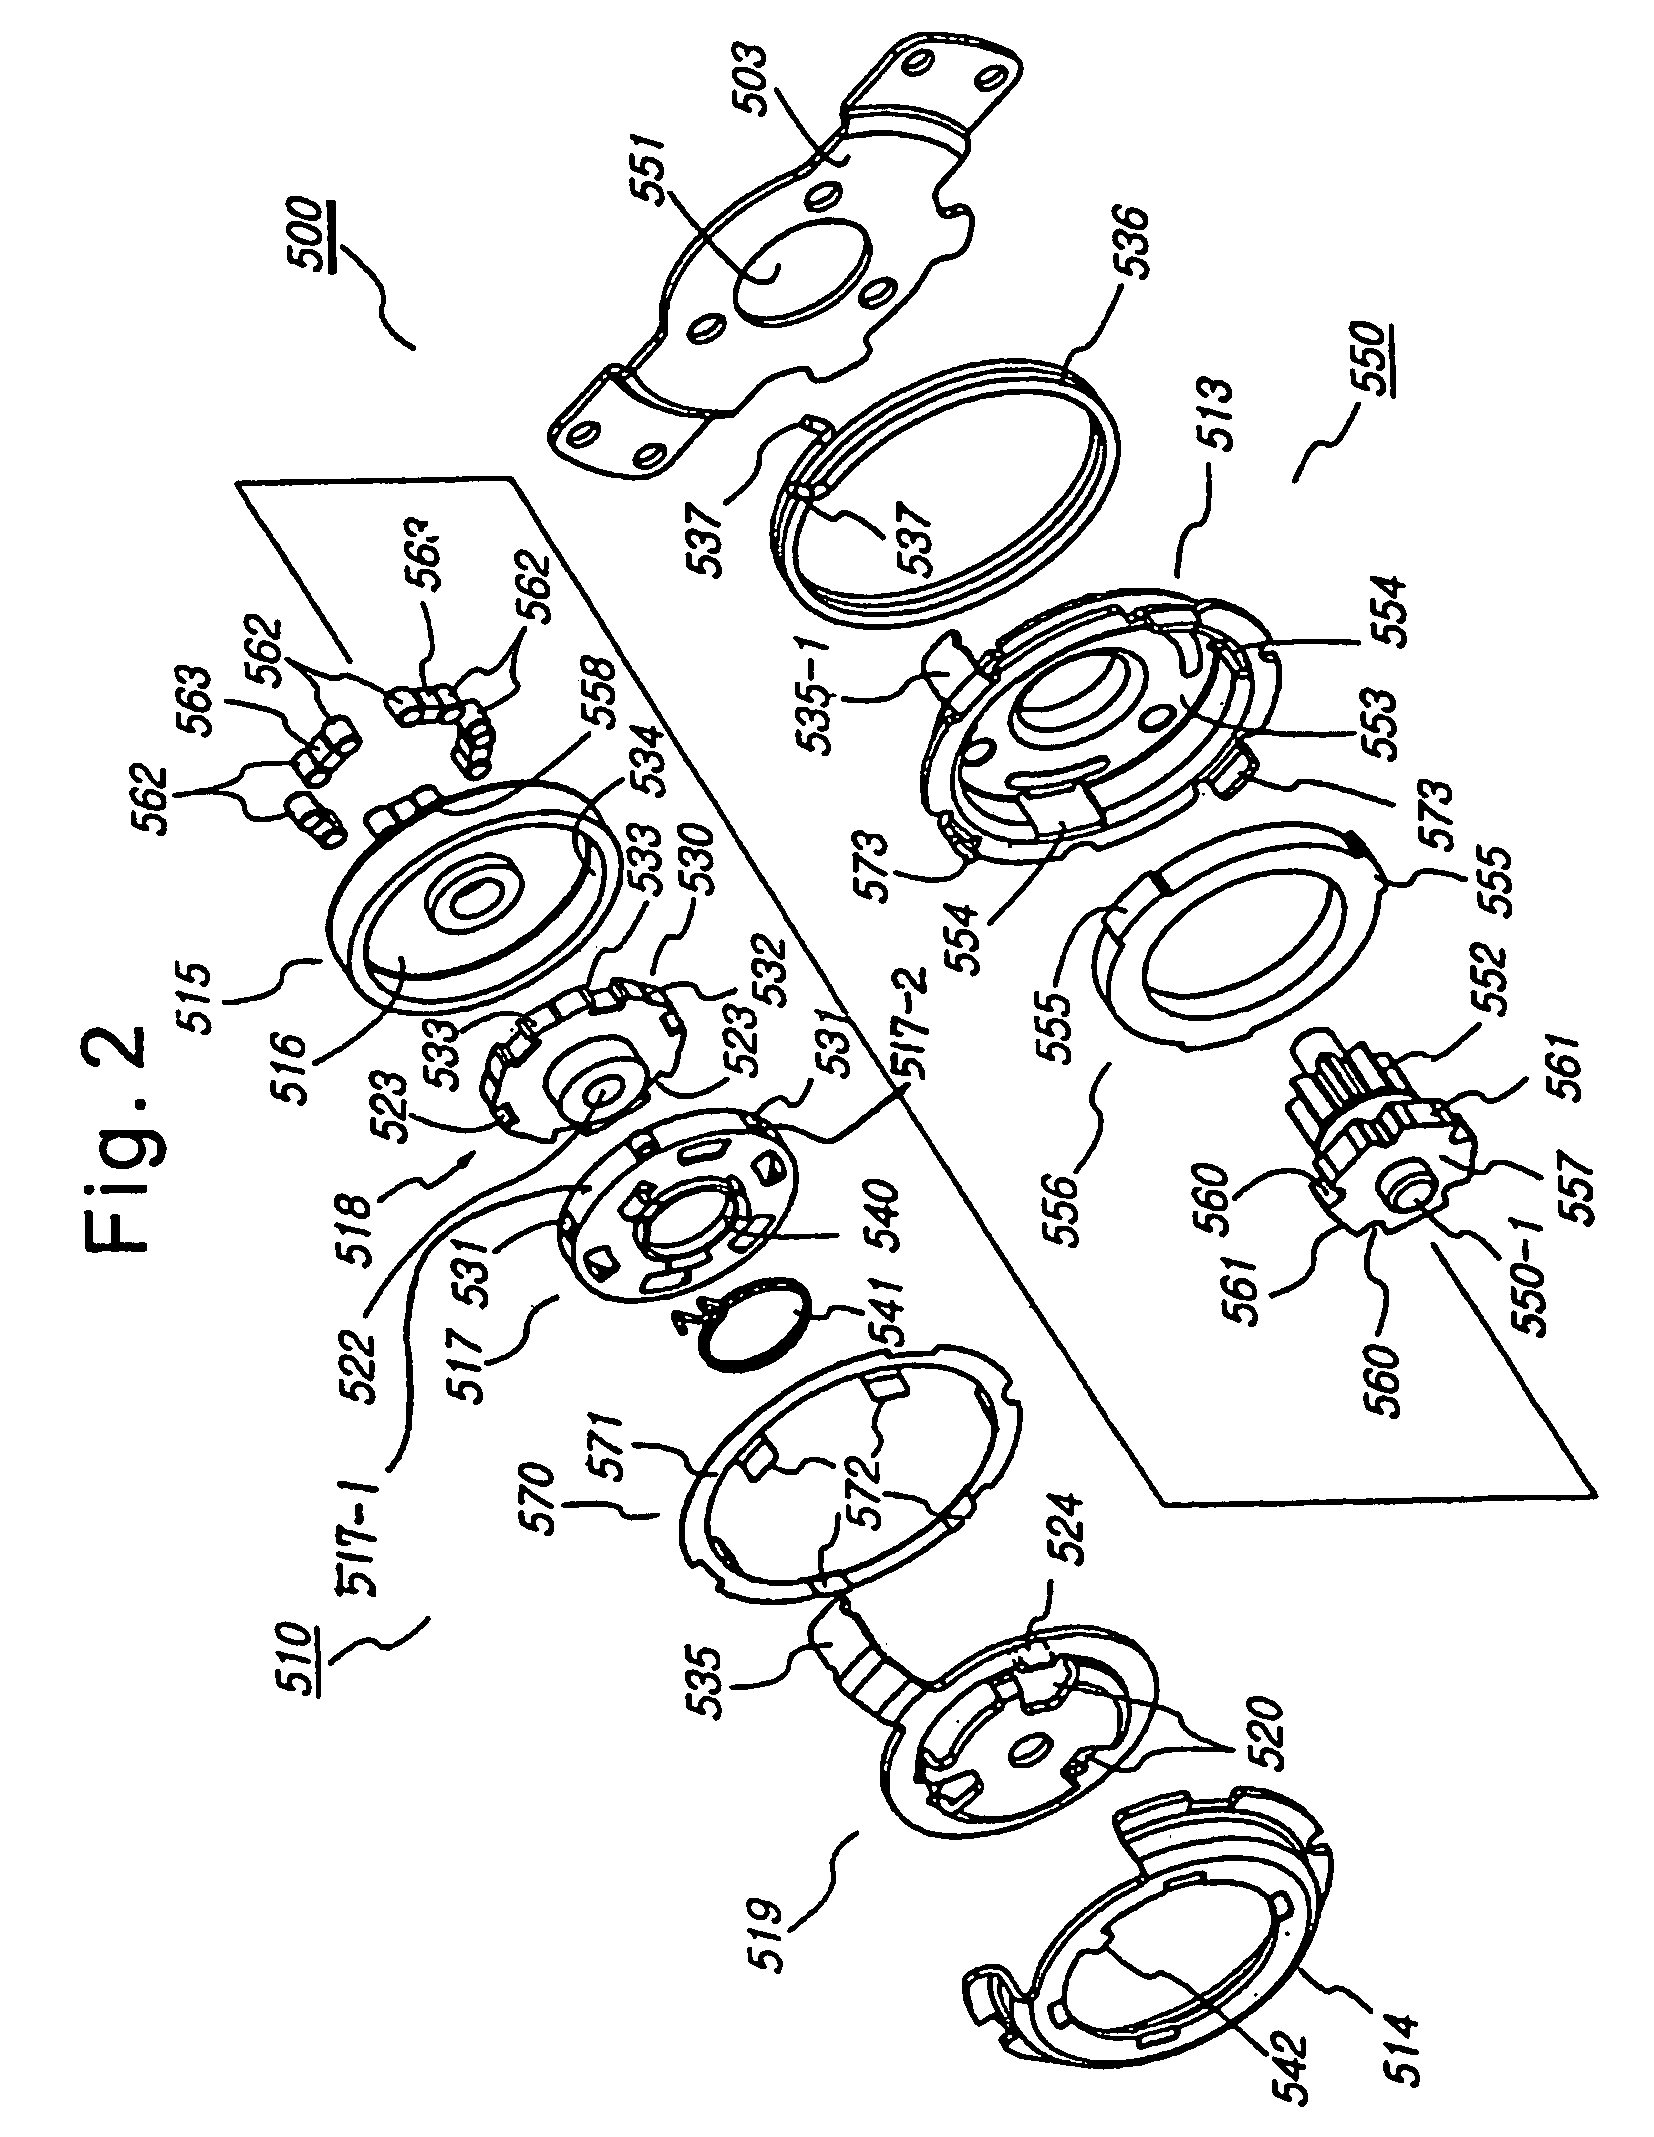 Seat cushion pumping device for vehicle